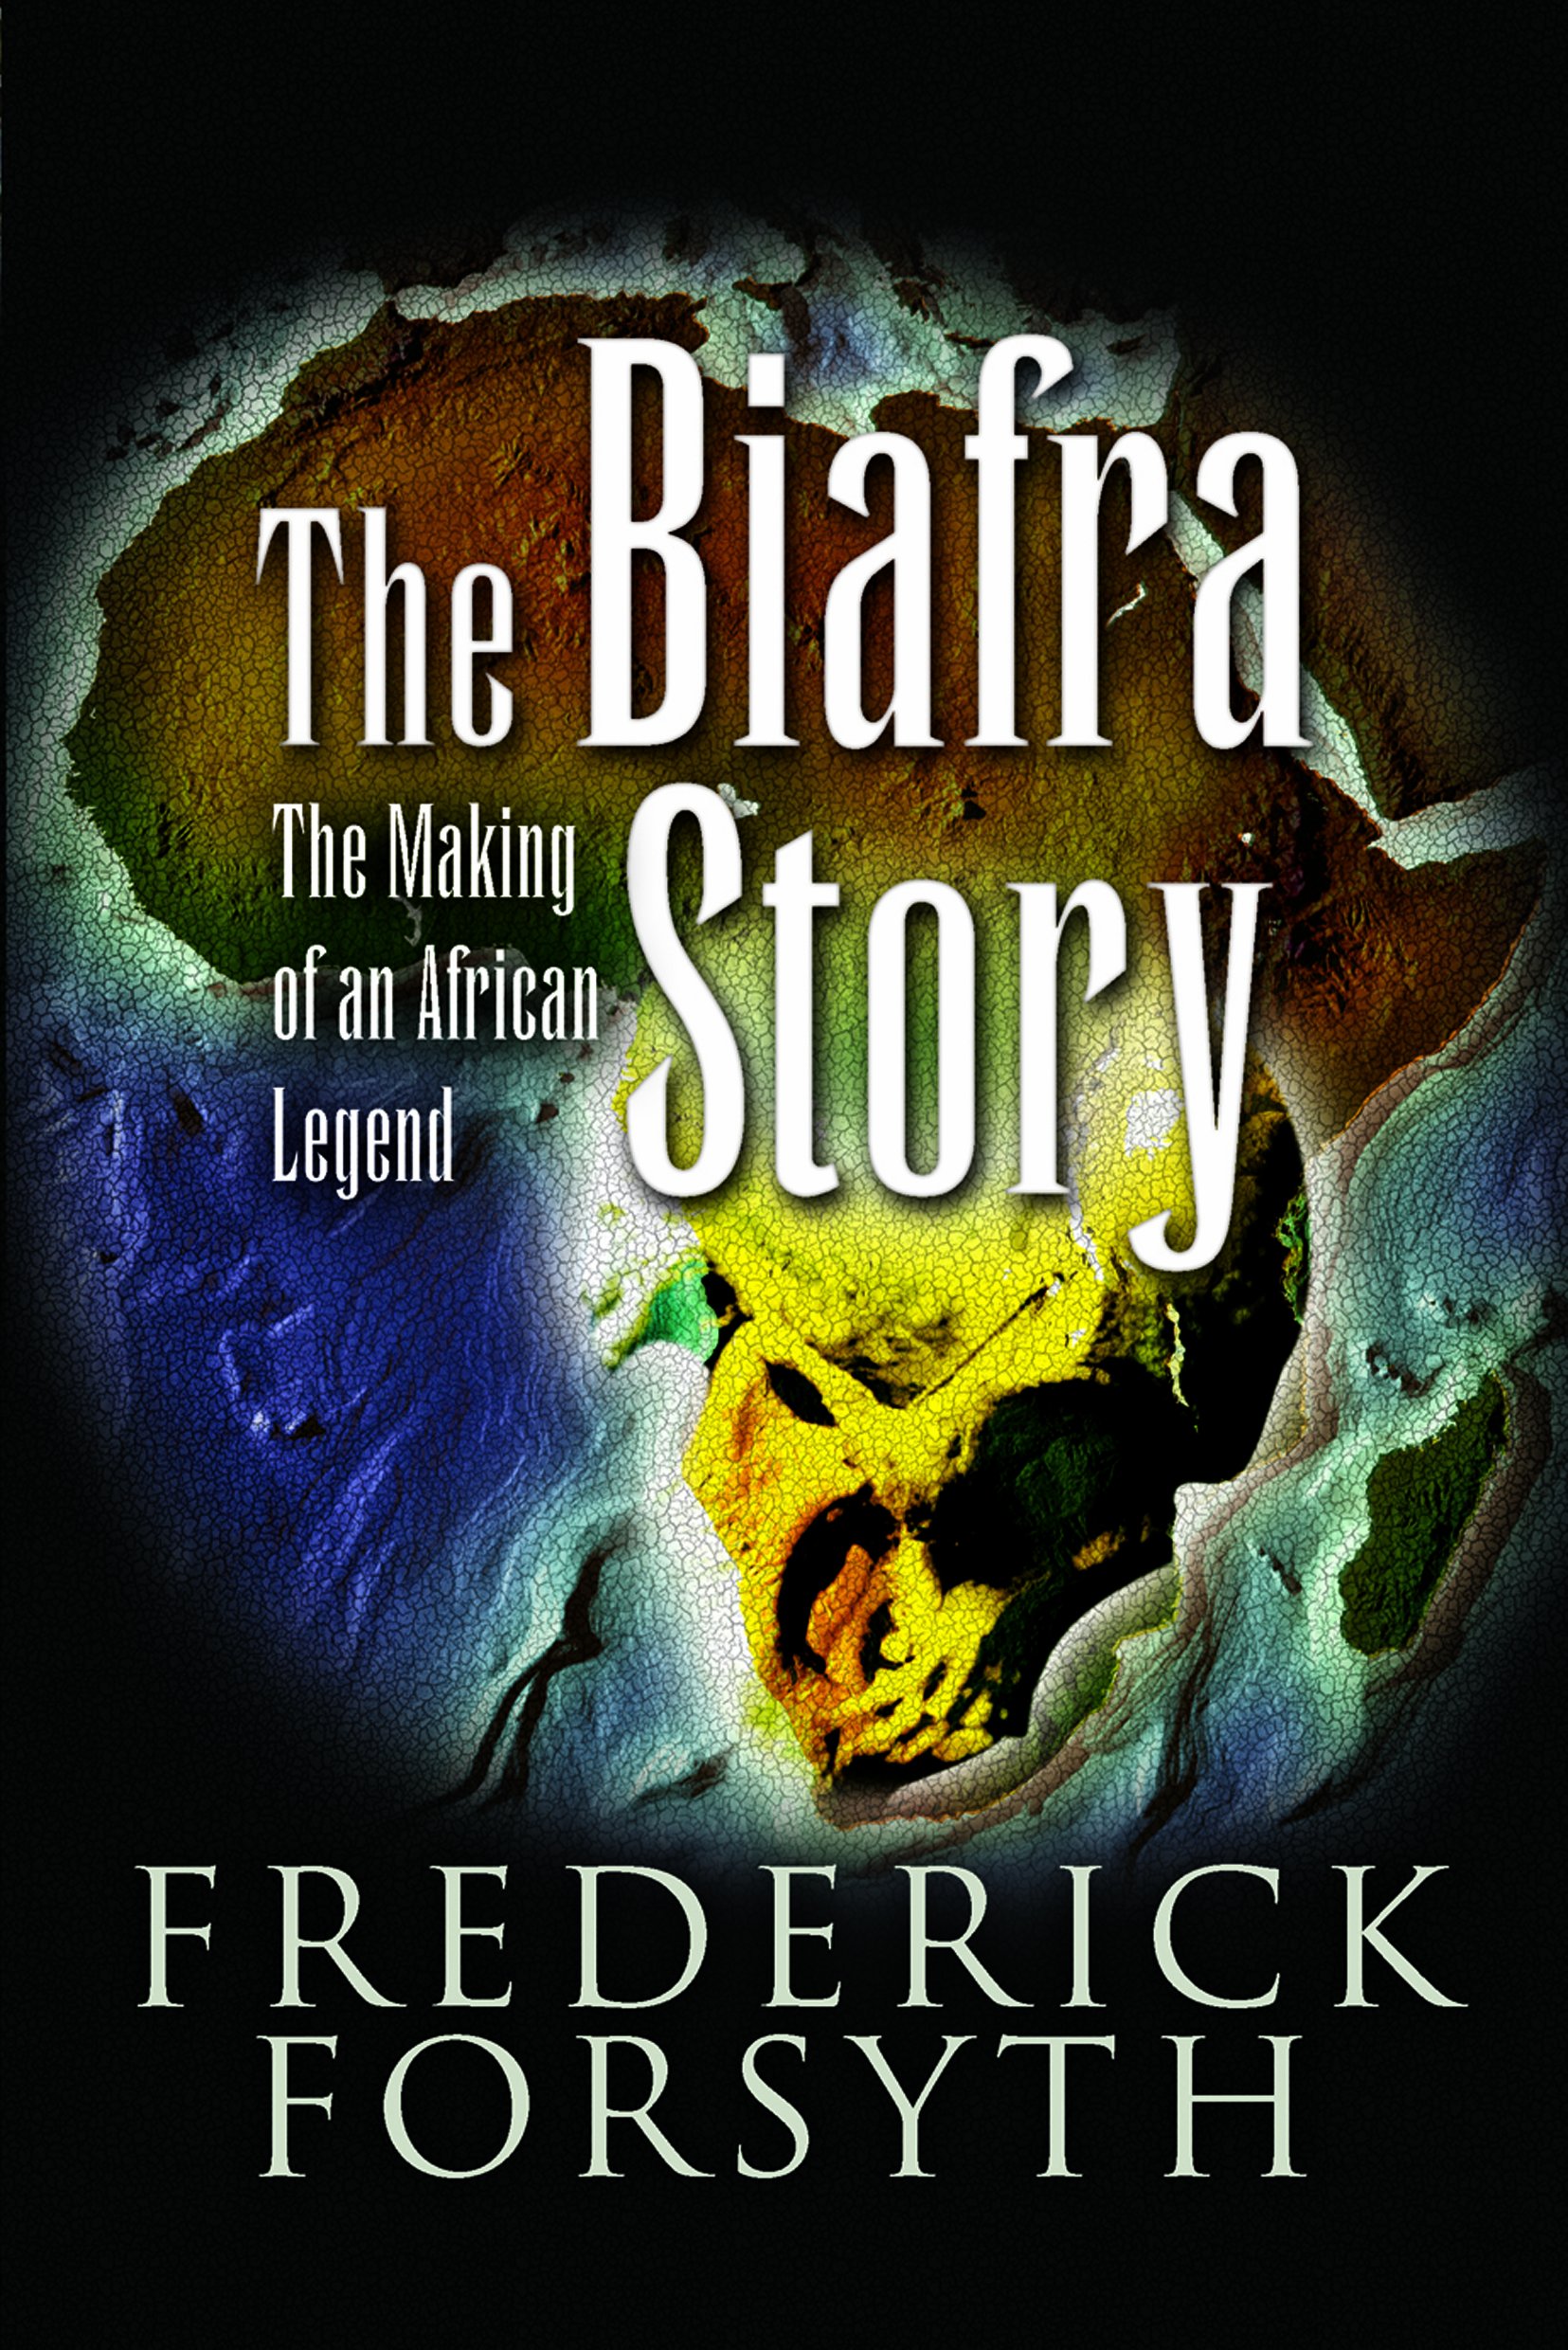 Book Cover of The Biafra Story